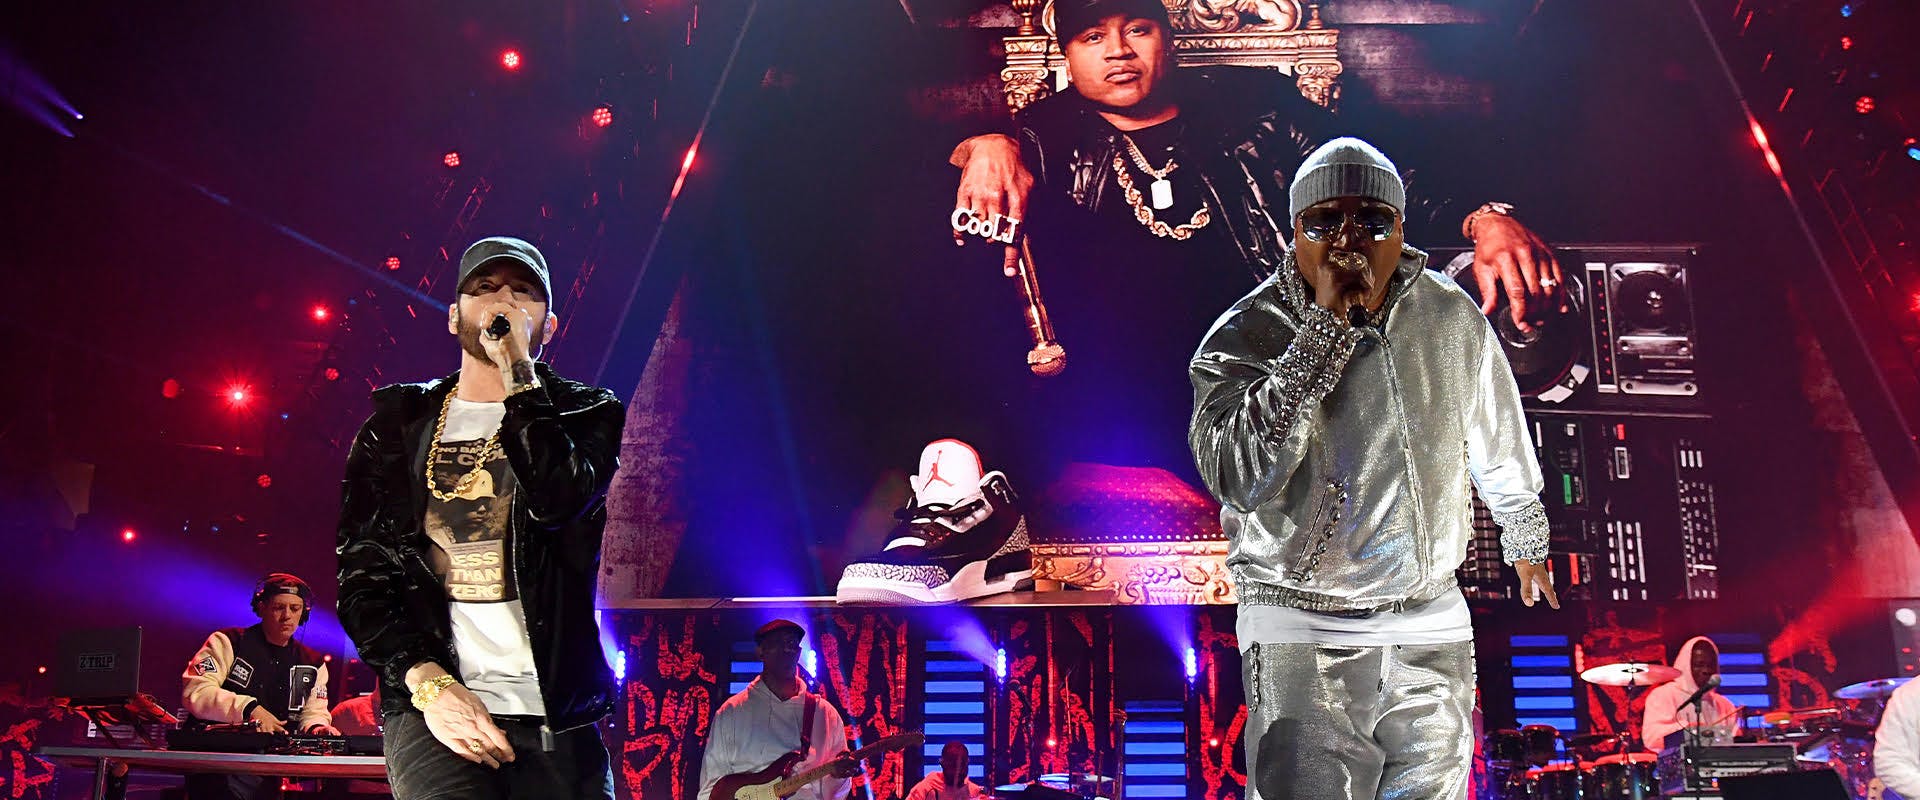 Eminem and LL COOL J perform "Rock The Bells" together at the Rock & Roll Hall of Fame